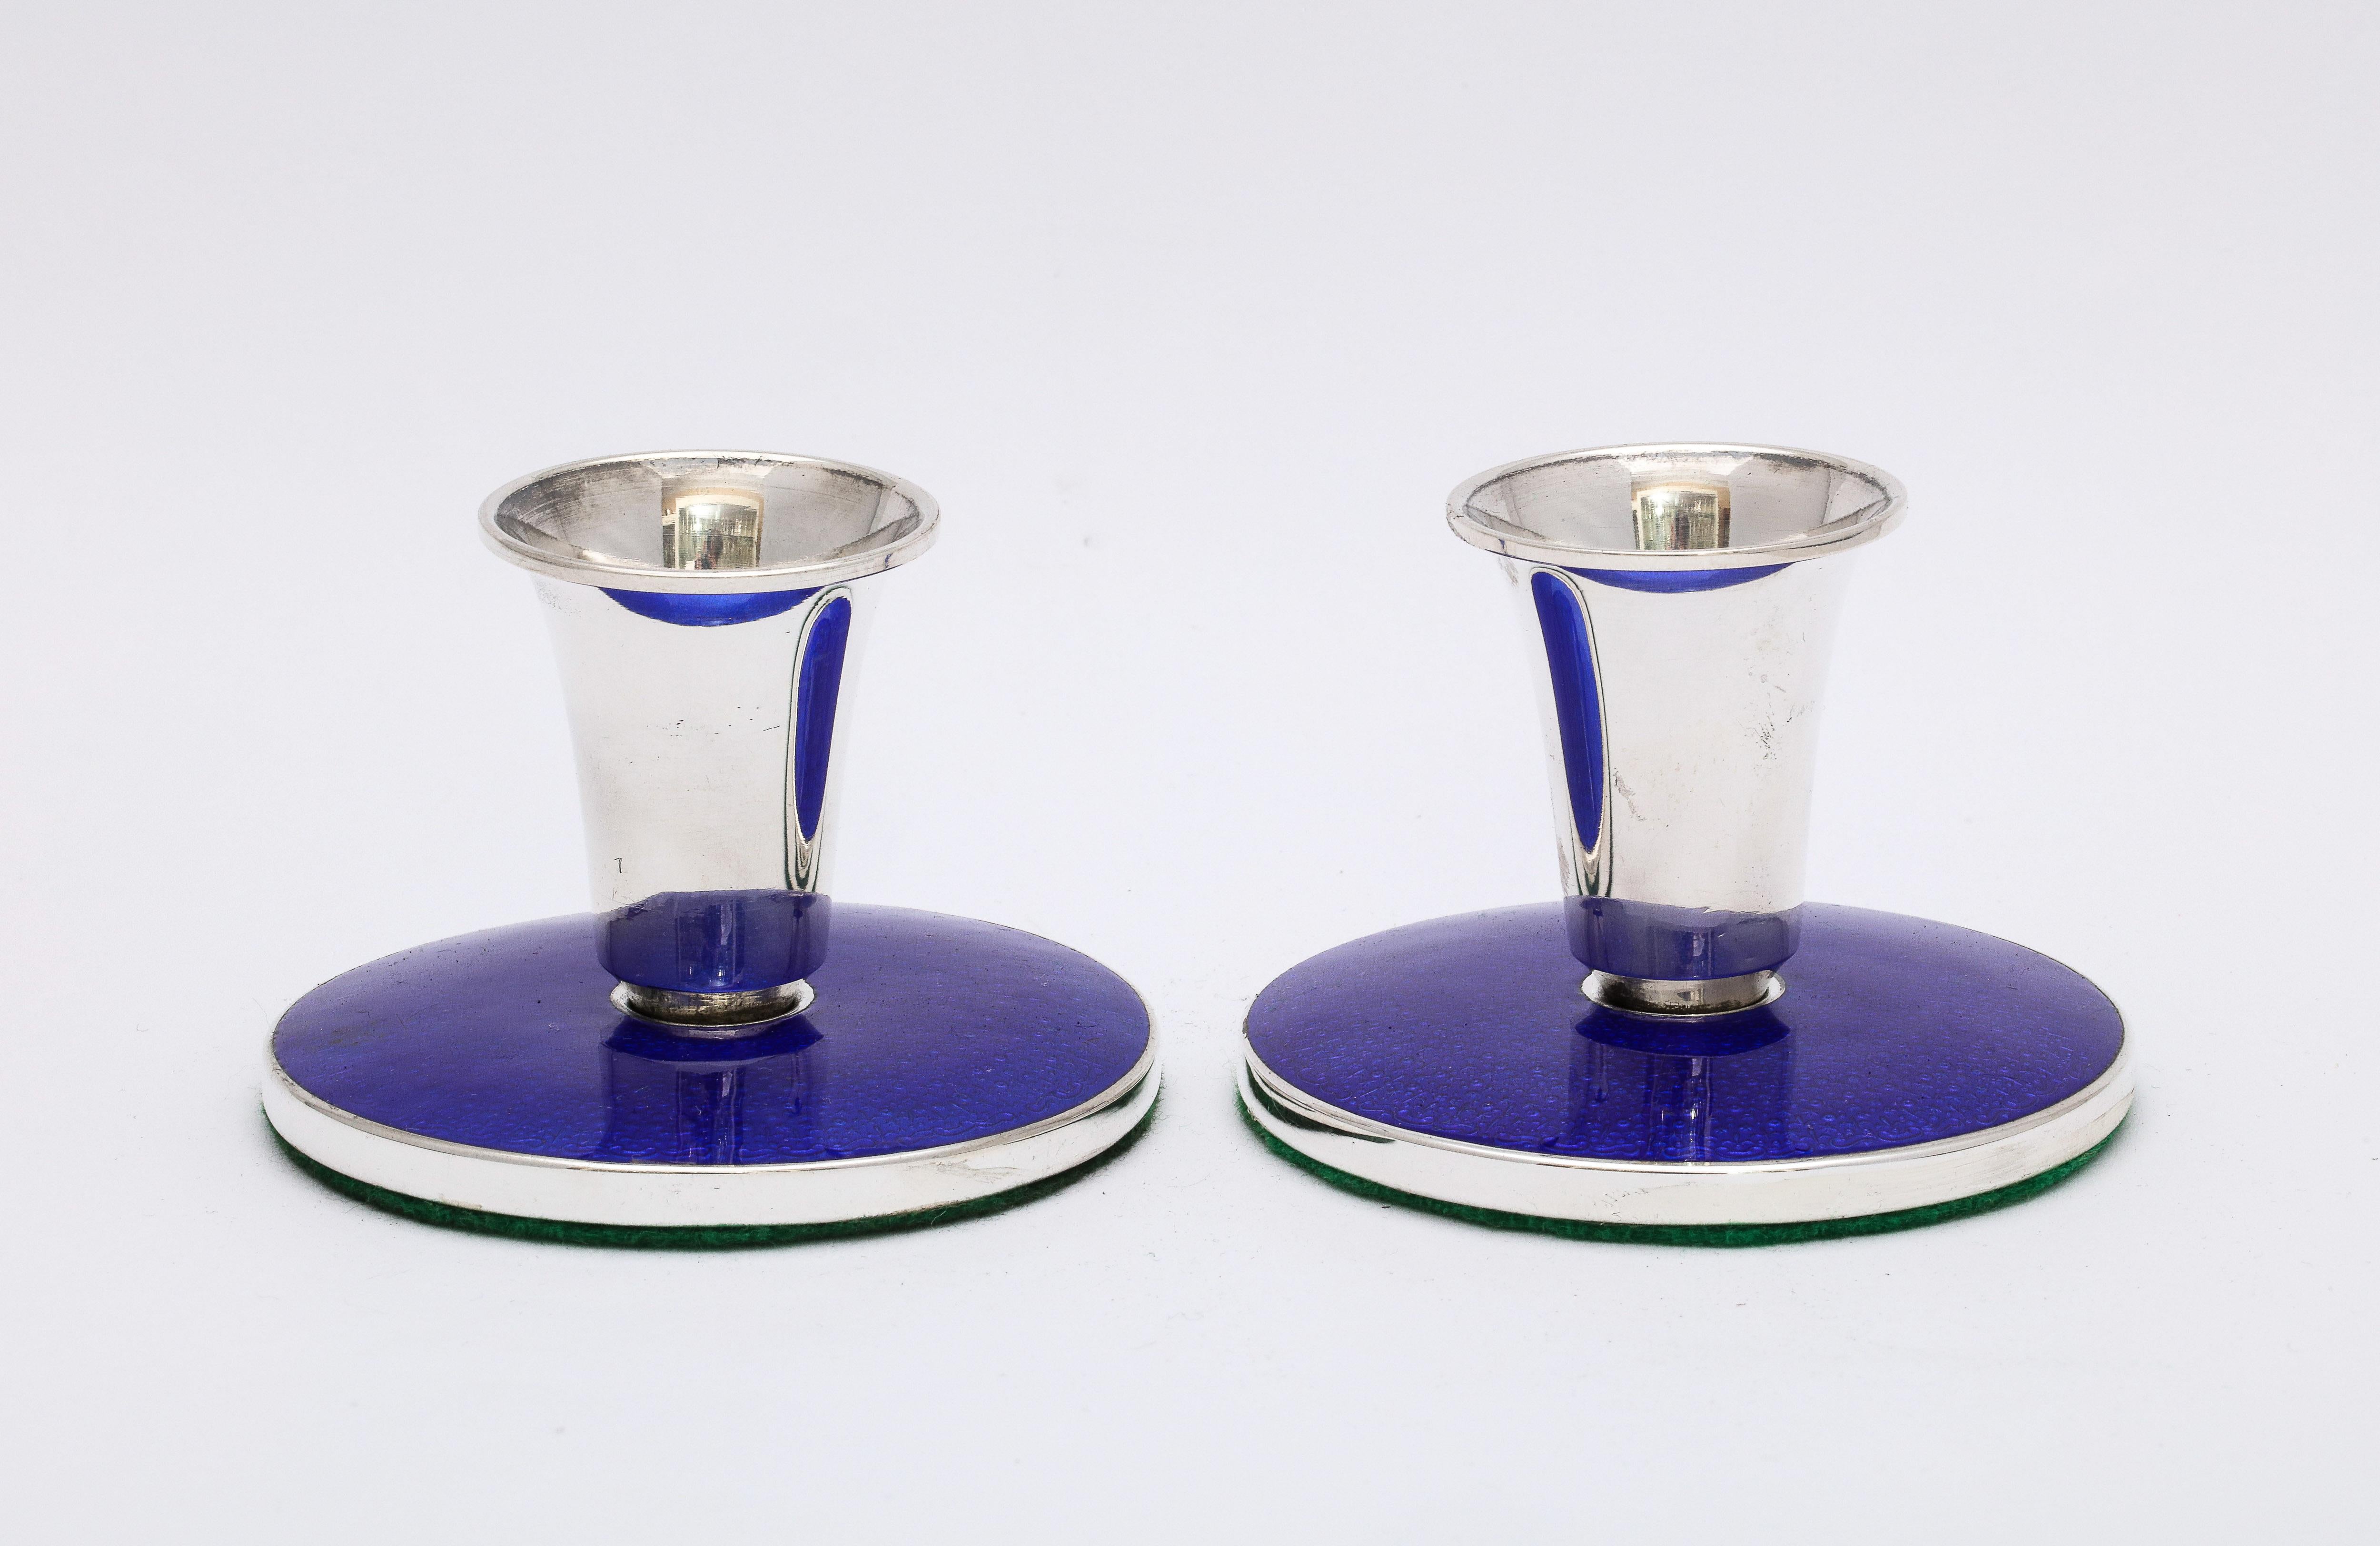 Mid-20th Century Pair of Midcentury Danish Sterling Silver and Cobalt Blue Enamel Candlesticks